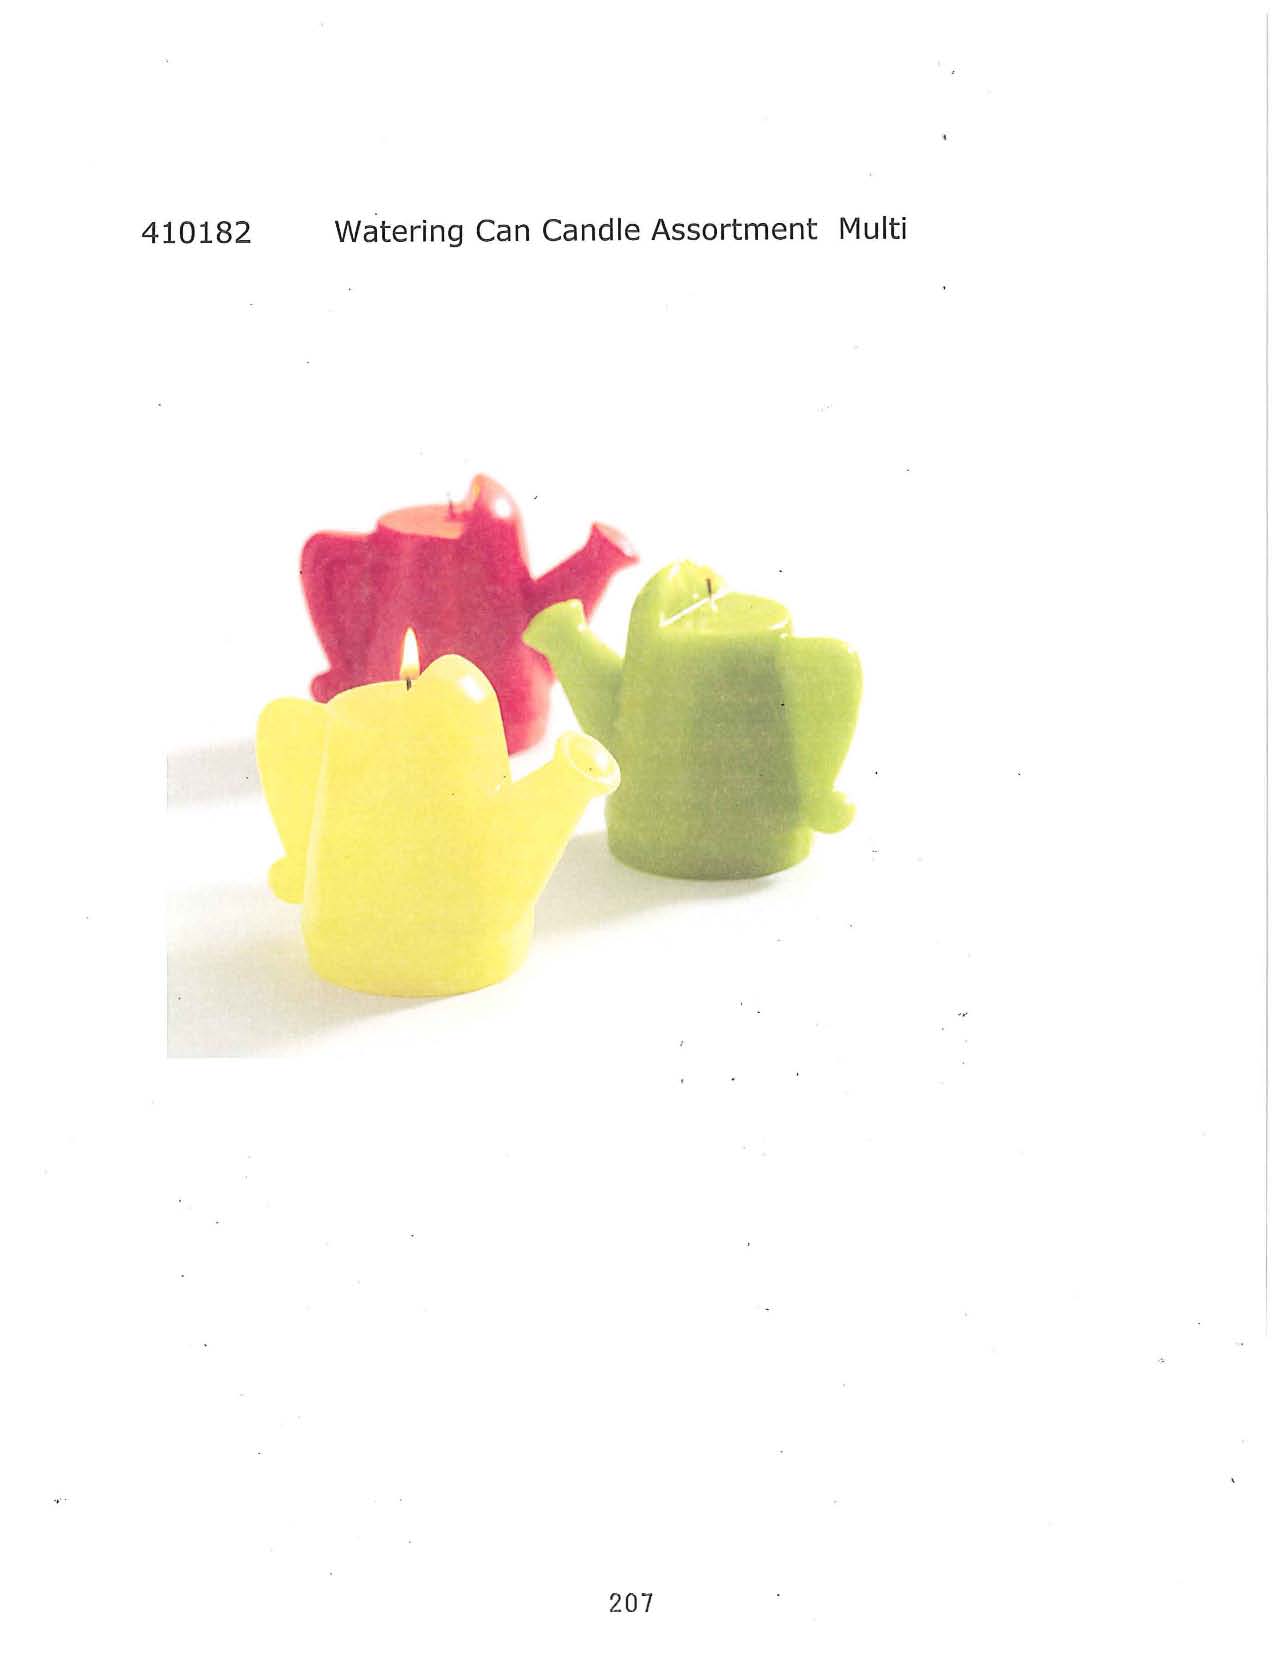 Watering Can Candle Assortment - Multi